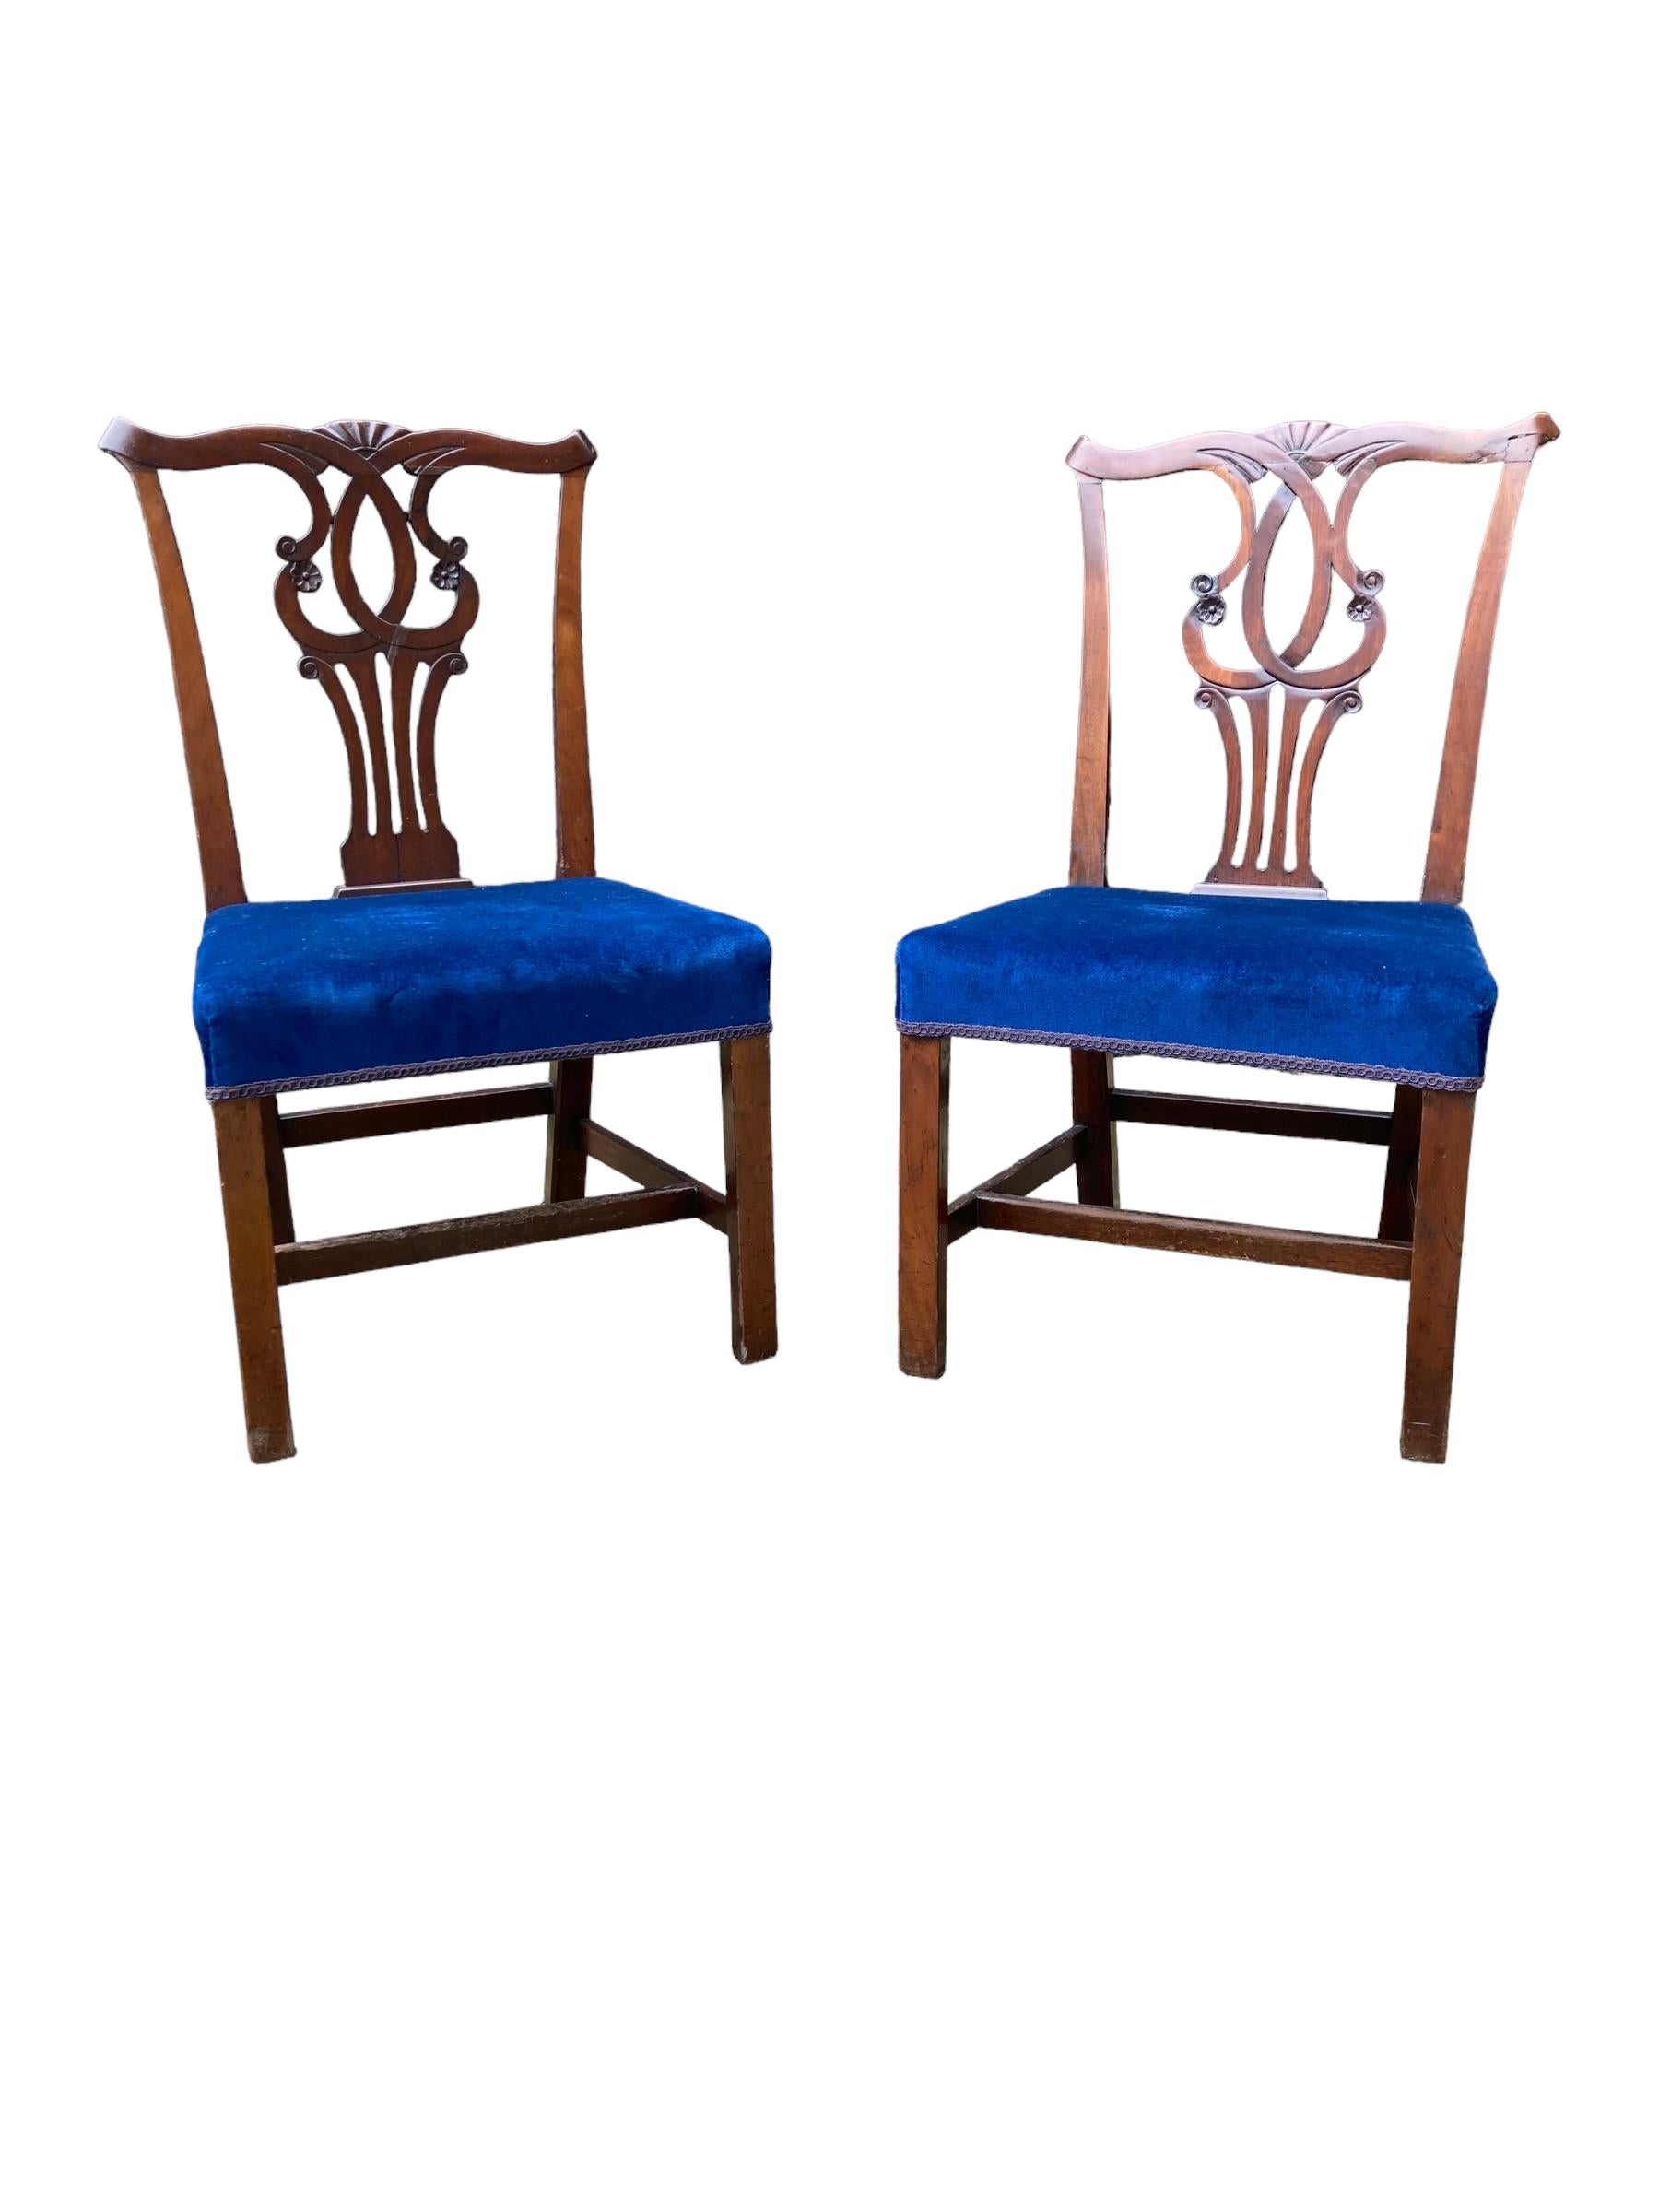 A pair of Mahogany Chippendale style Edwardian dining chairs. Reupholstered in a deep blue velvet like fabric. Very solid and ornate chairs. One of the chairs has a professional but minor repair to the back which adds to the charm and character of